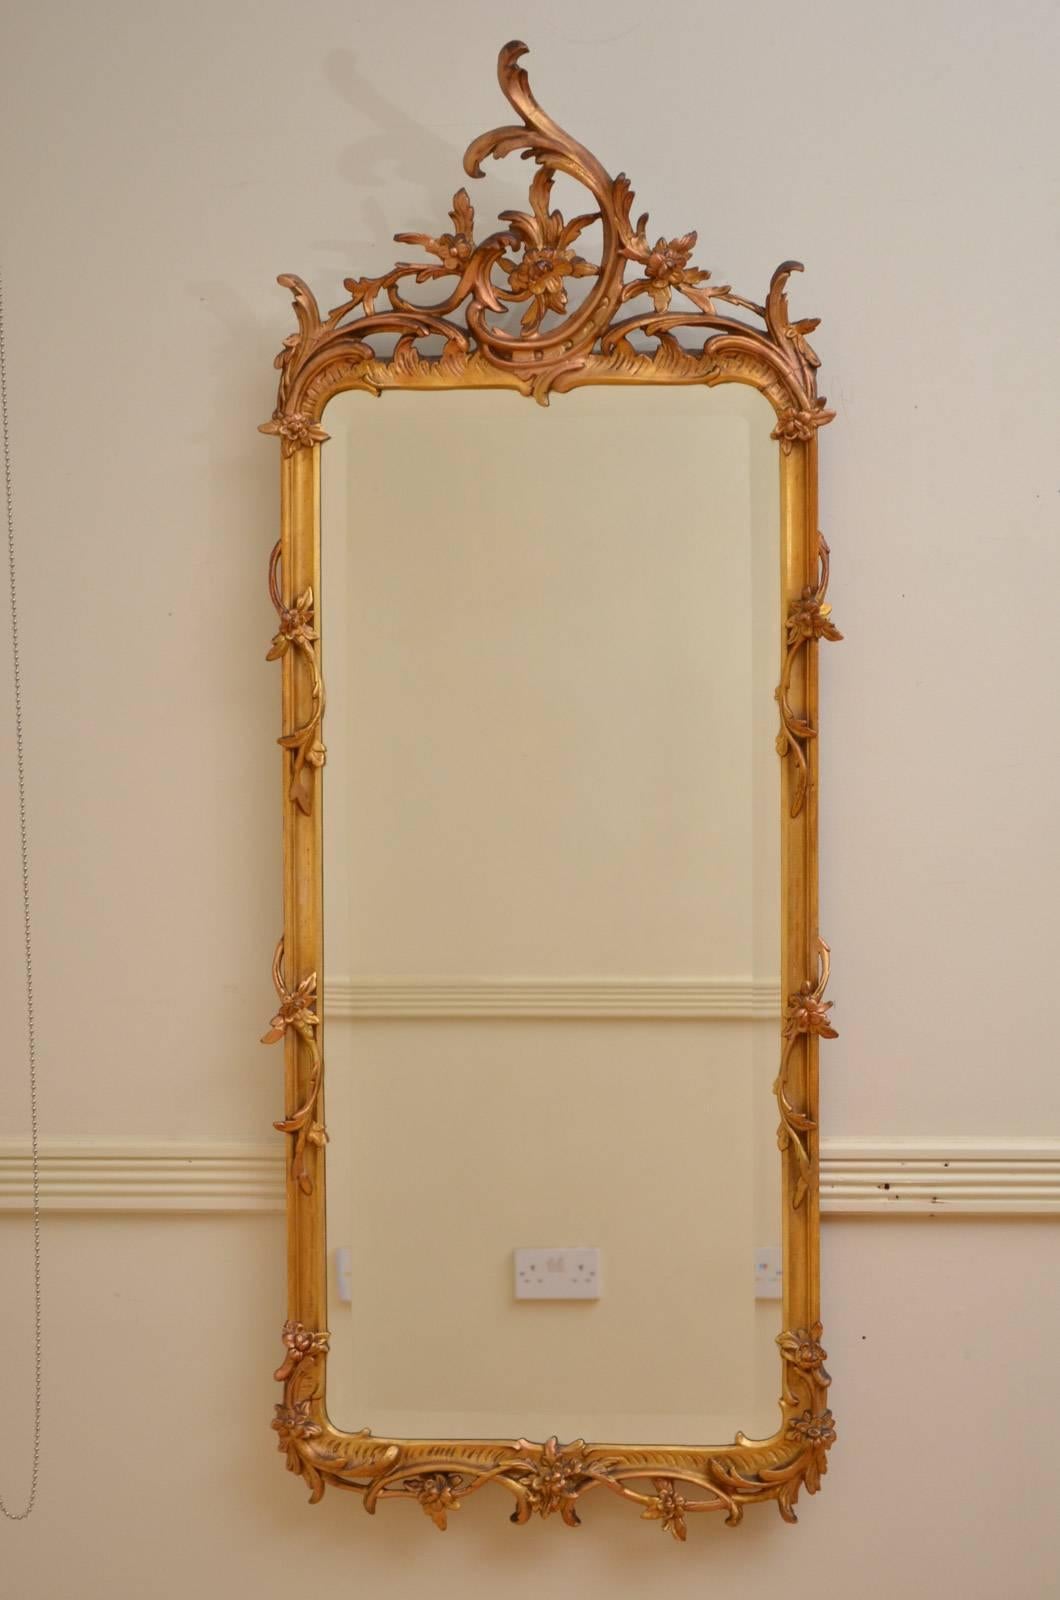 Sn4339 Turn of the century Rococo design gilded pier mirror, having original bevelled edge glass in scroll, rocaille and flower decorated frame, all in home ready condition. c1900
H54